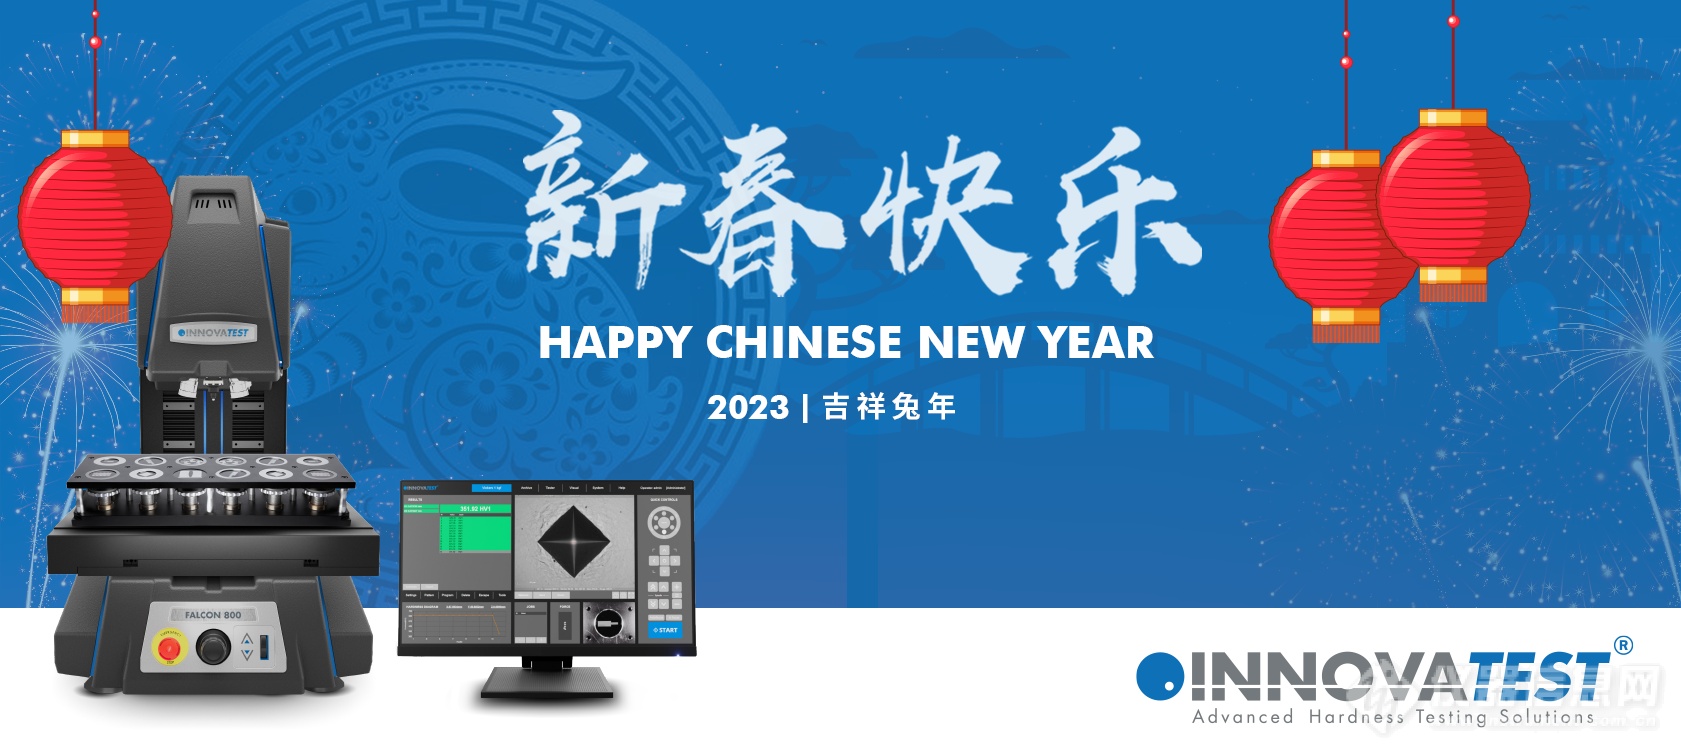 INNOVATEST_Happy Chinese New Year 2023.png